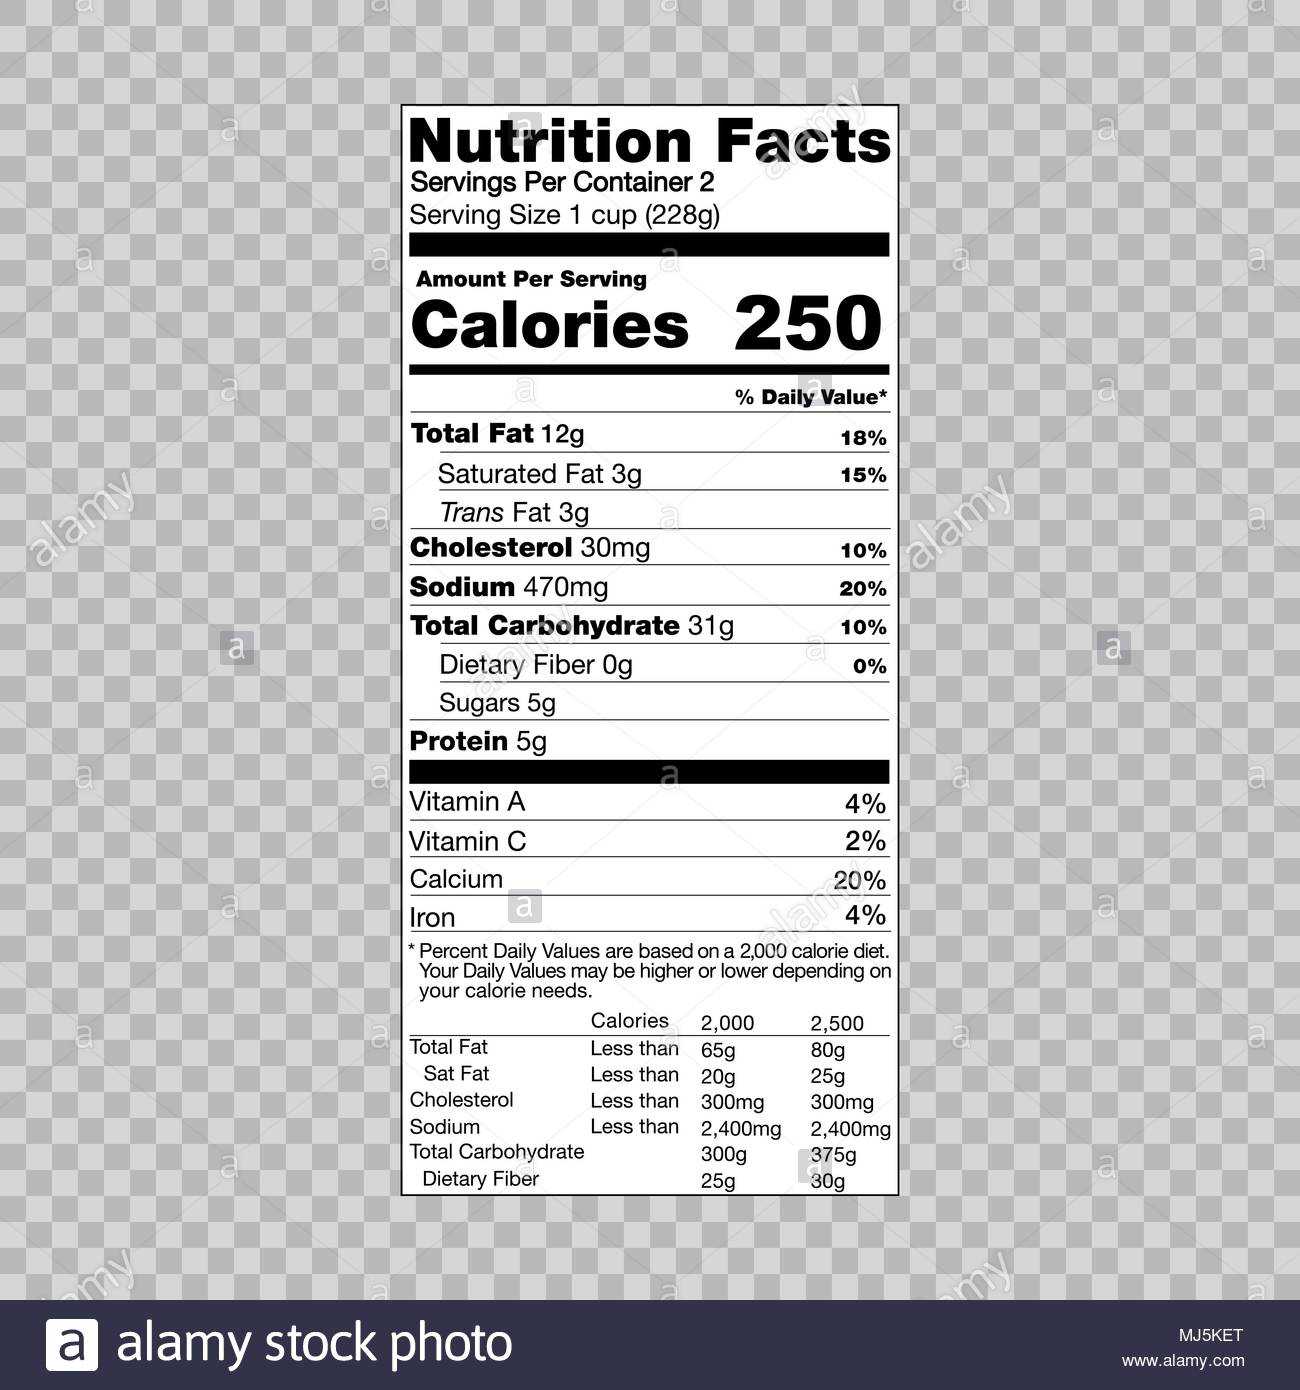 Nutrition Facts Information Template For Food Label Stock With Blank Food Label Template